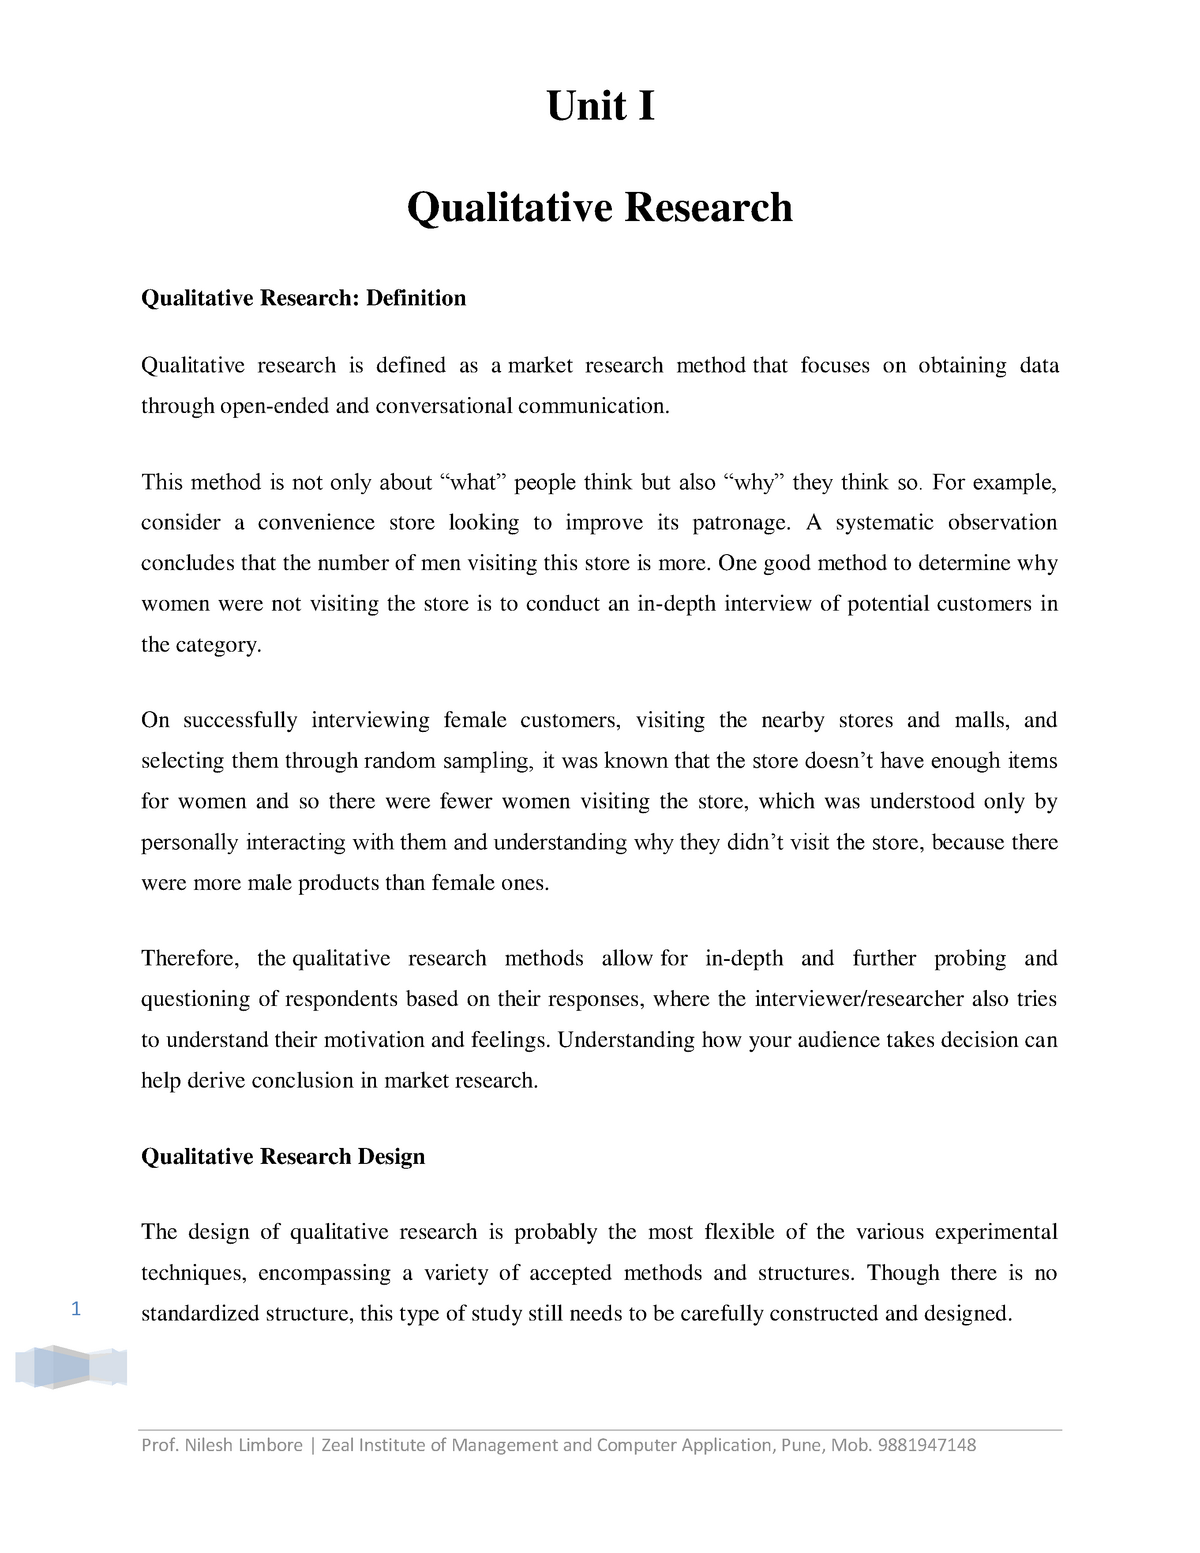 conclusion of qualitative research